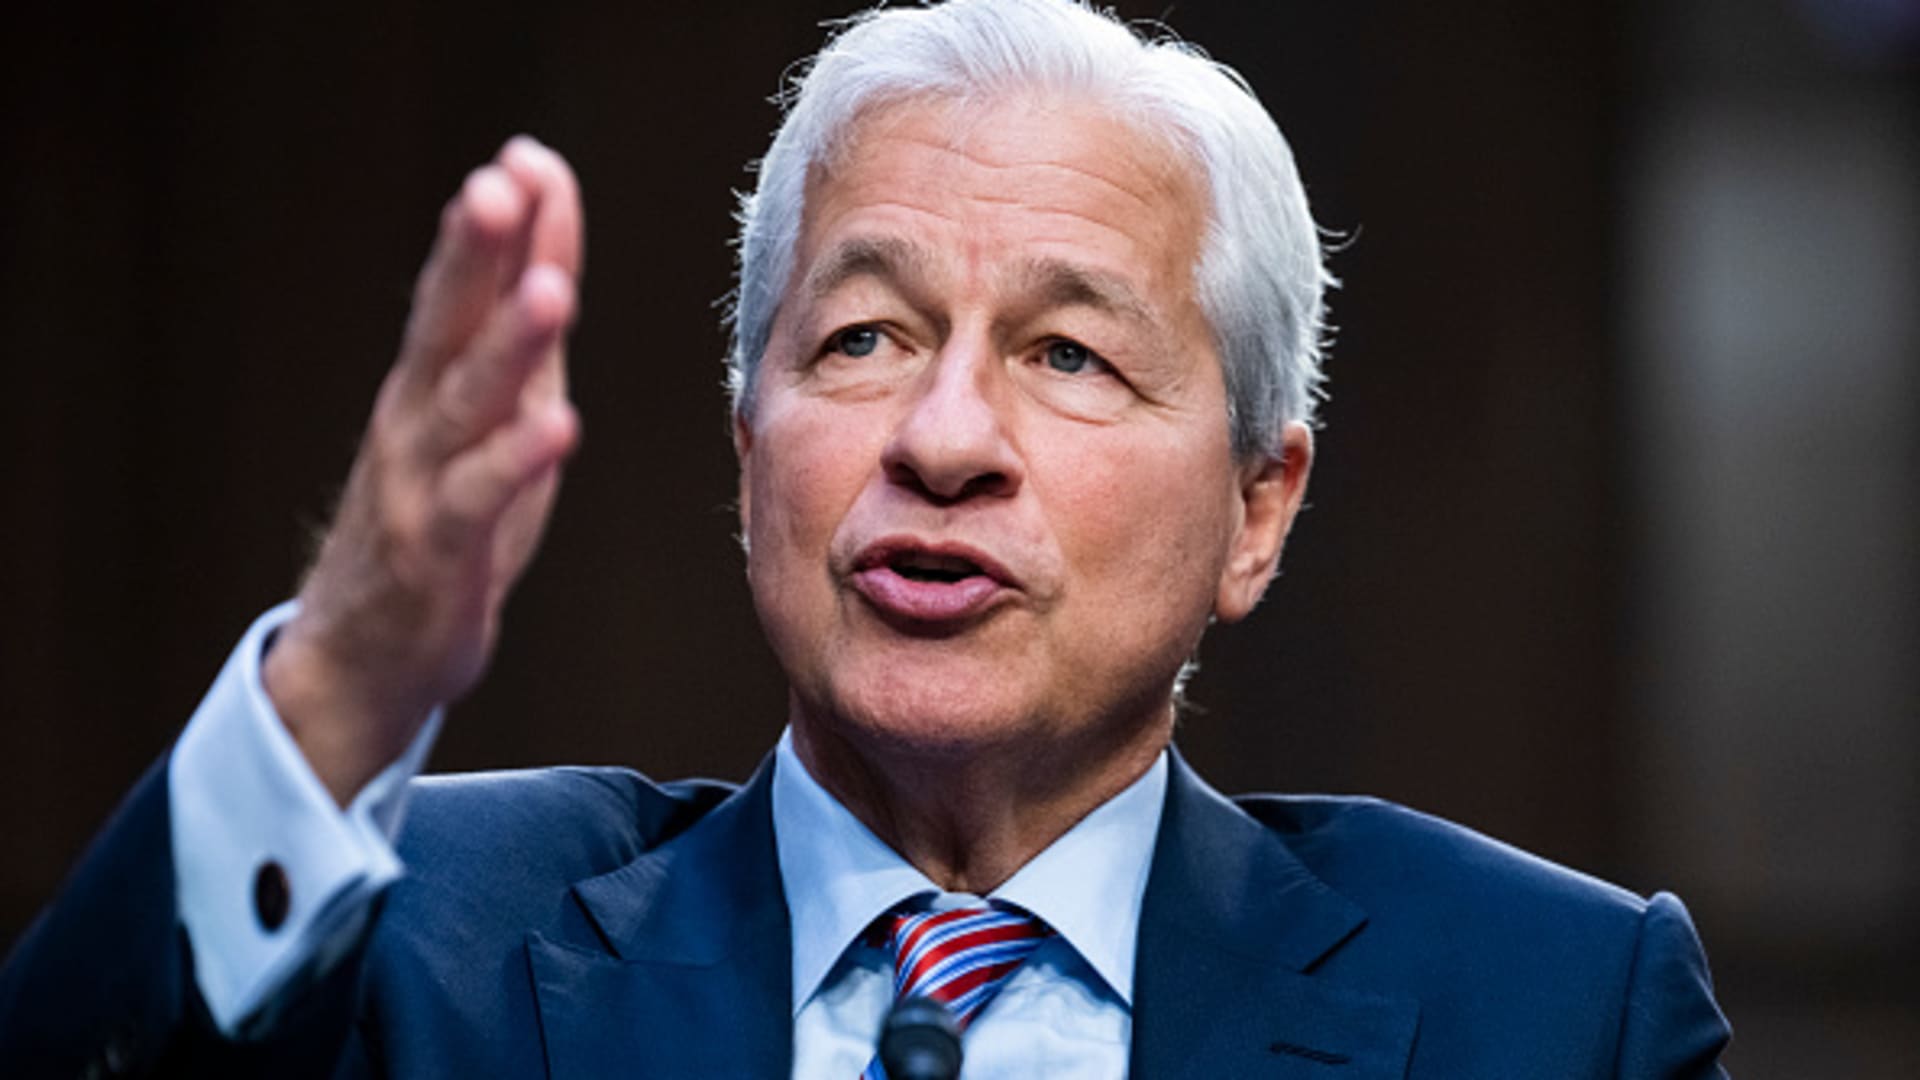 Jamie Dimon says it’s ‘unlikely’ that JPMorgan Chase will acquire another struggling bank